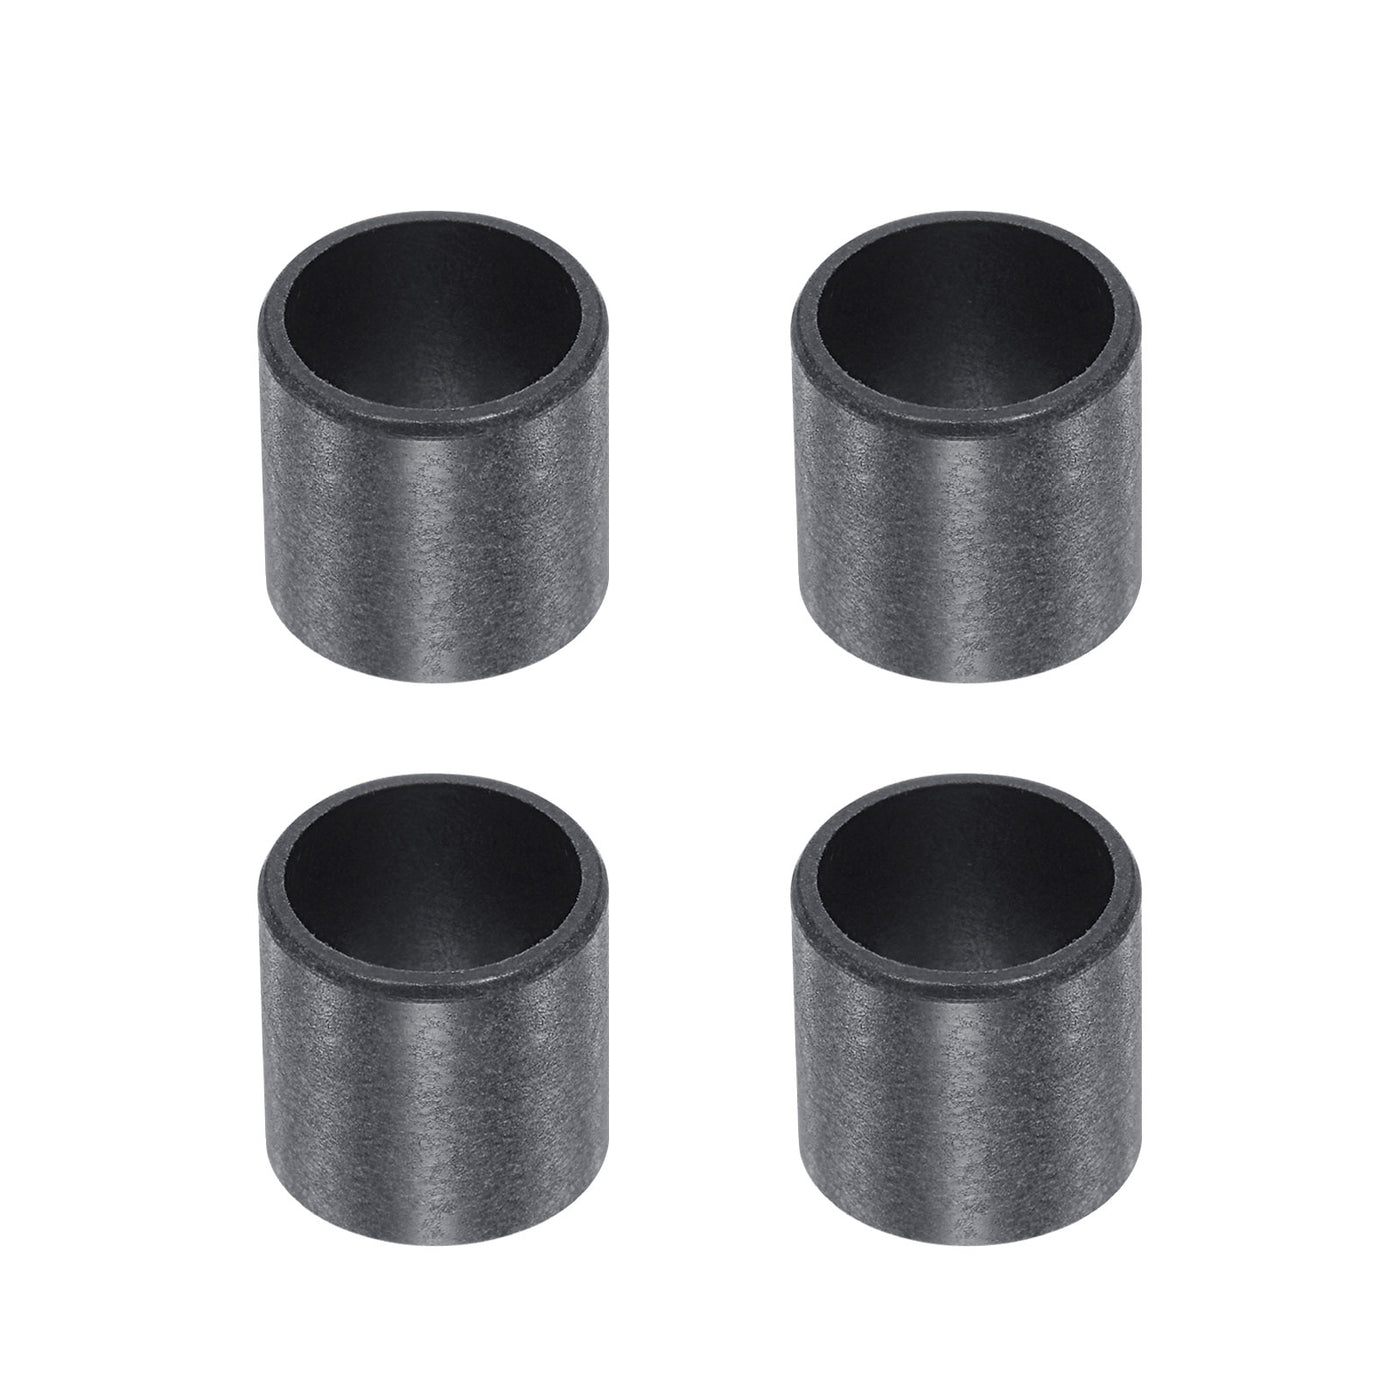 uxcell Uxcell Sleeve Bearings 10mmx12mmx10mm POM Wrapped Oilless Bushings Black 4pcs